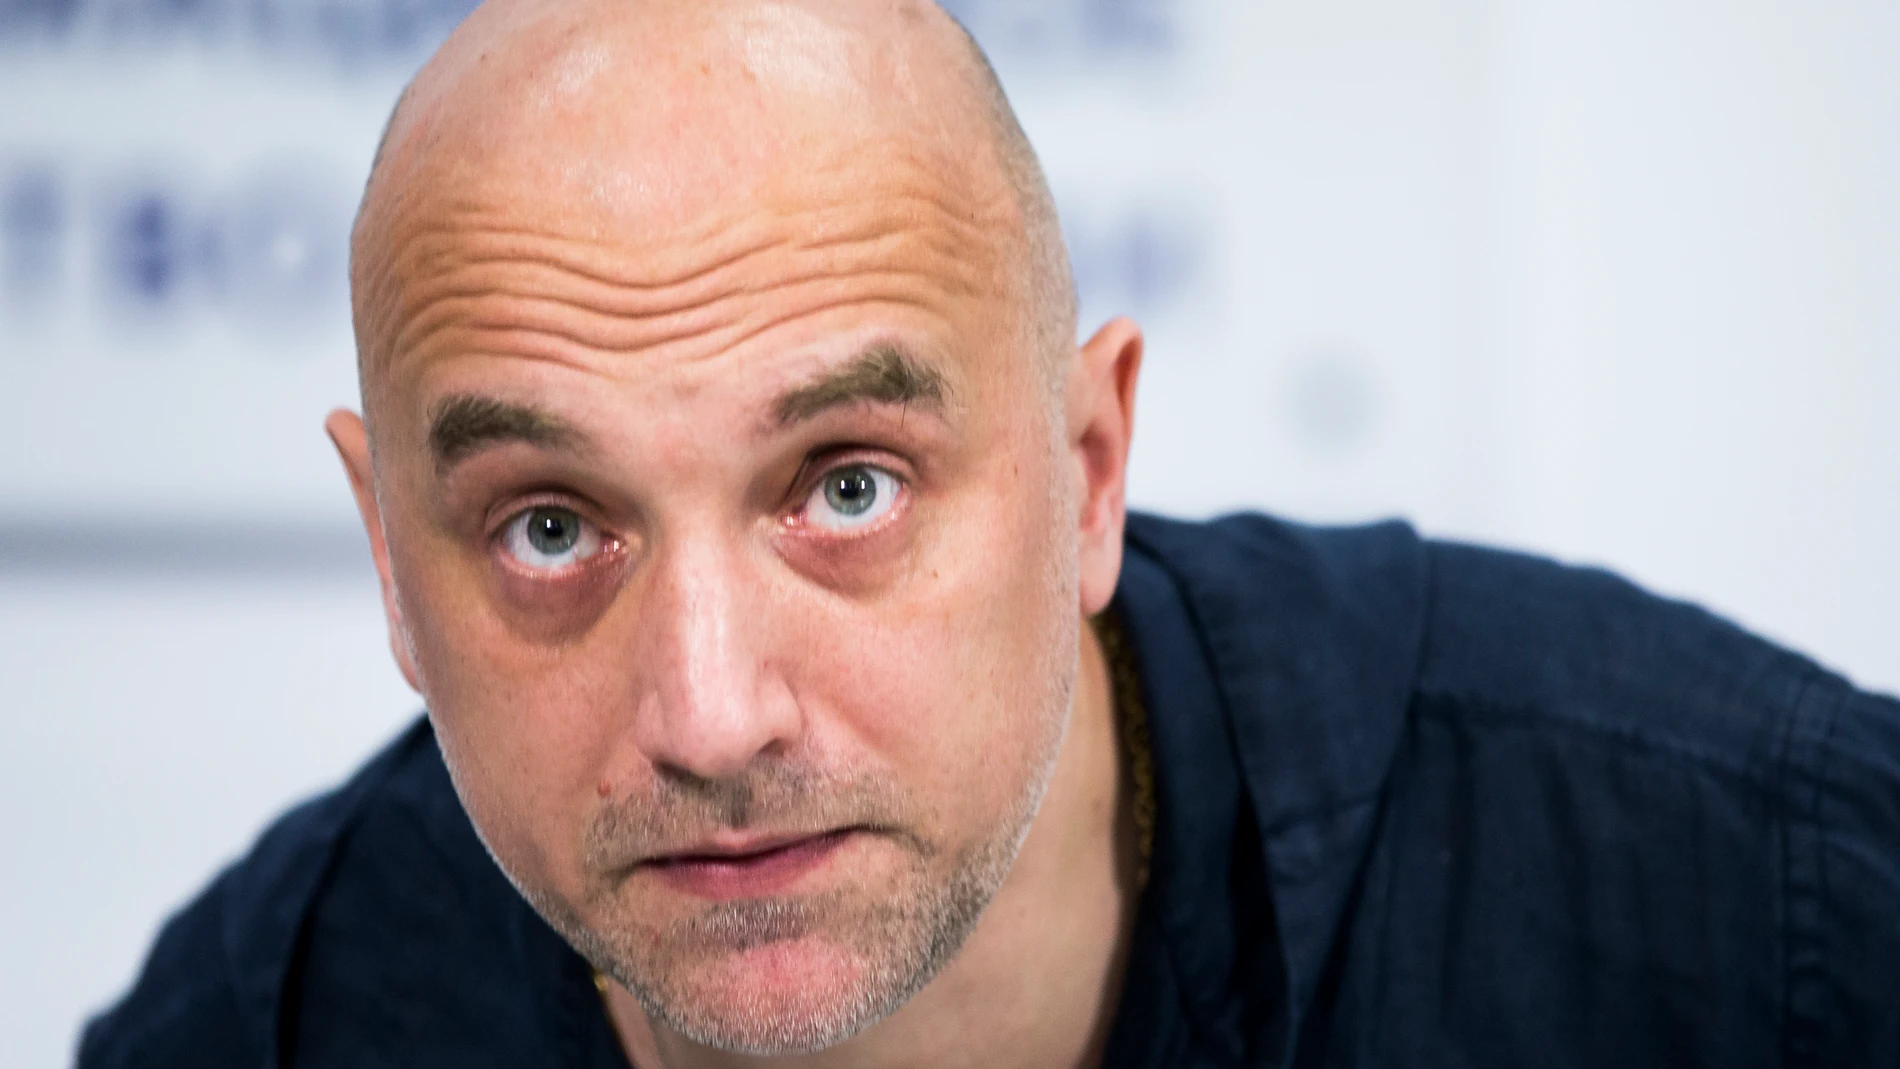 FILE Russian writer and publicist Zakhar Prilepin attends a news conference in Moscow, Russia, Tuesday, Feb. 21, 2017. Prilepin's car exploded in Russia on Saturday, May 6, 2023, Russia's state news agency Tass reported, citing emergency and law enforcement officials. (AP Photo/Alexander Zemlianichenko, File)